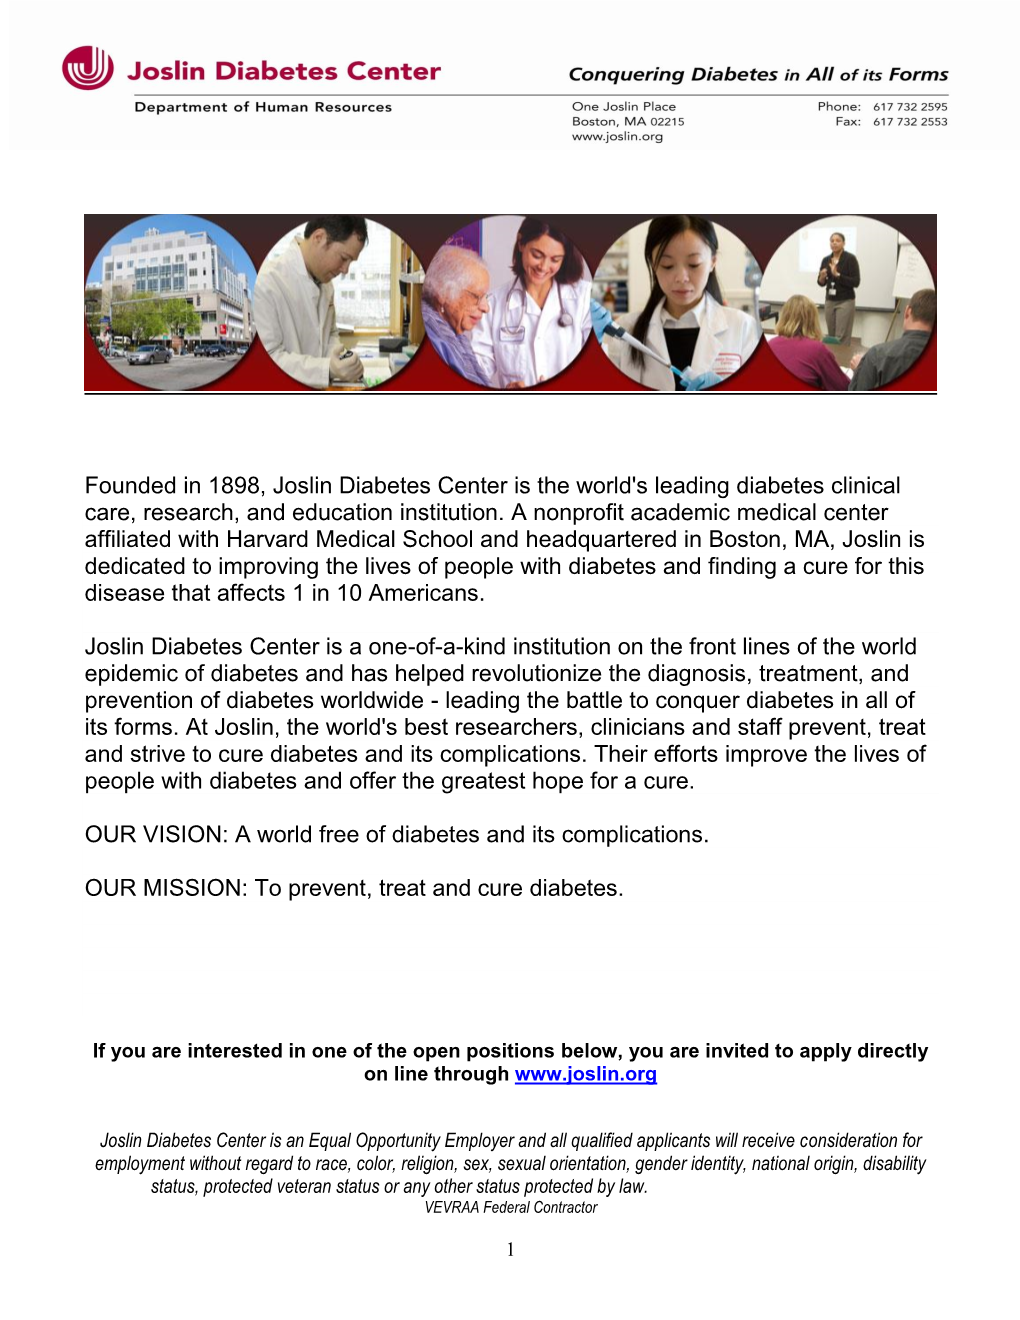 Founded in 1898, Joslin Diabetes Center Is the World's Leading Diabetes Clinical Care, Research, and Education Institution